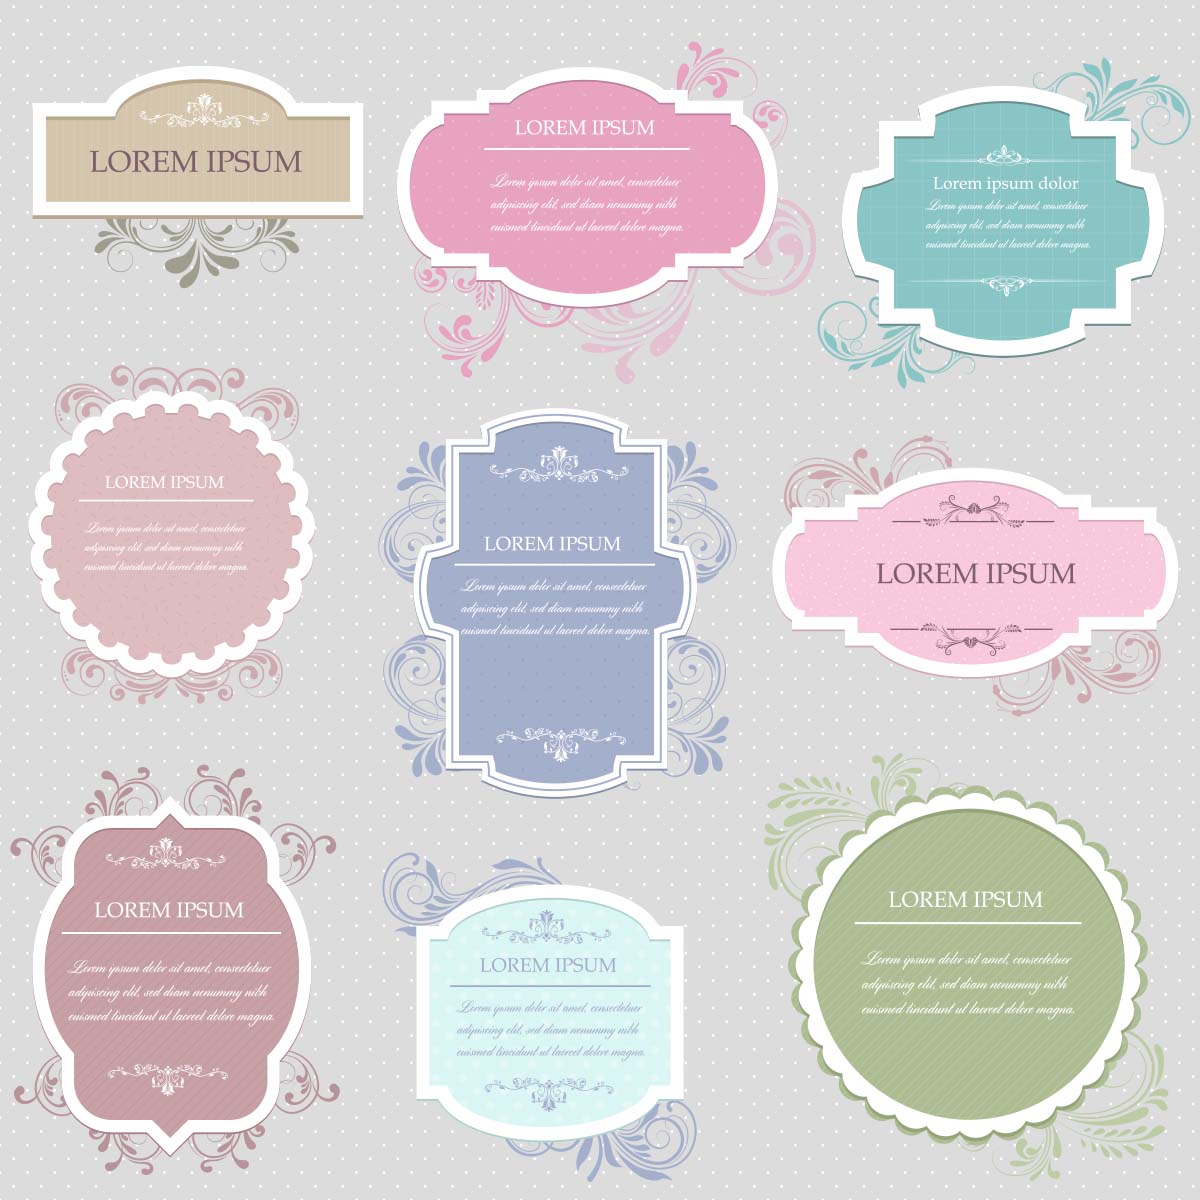 vector free download frame - photo #2